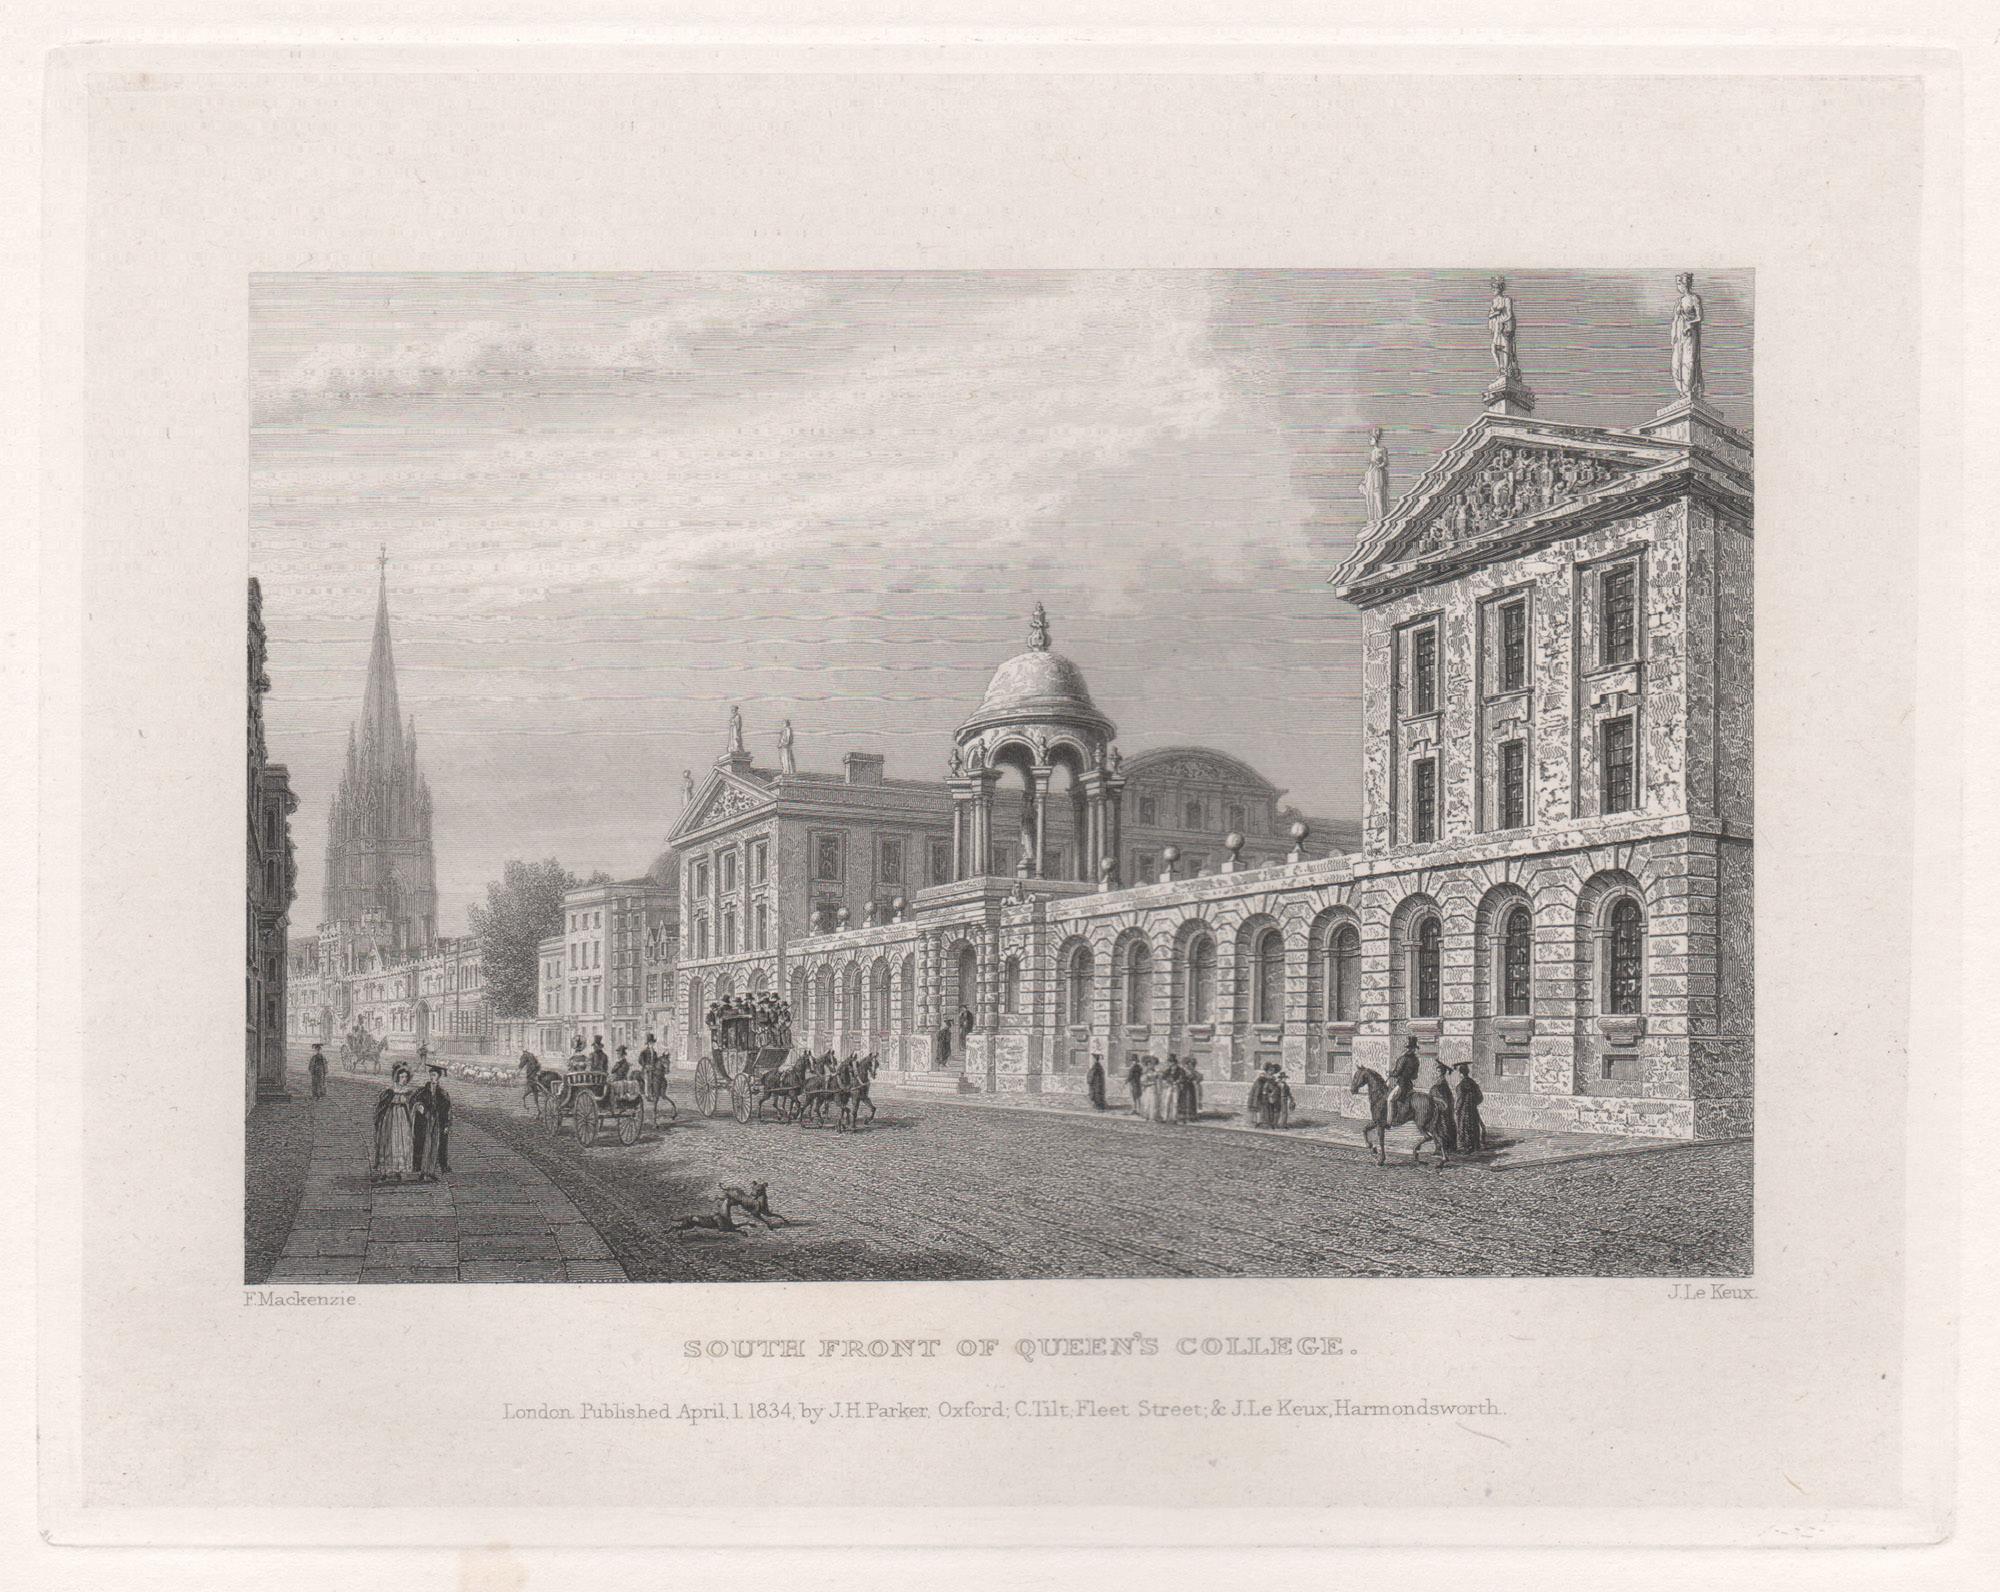 South Front of Queen's College. Oxford University. Antique C19th engraving